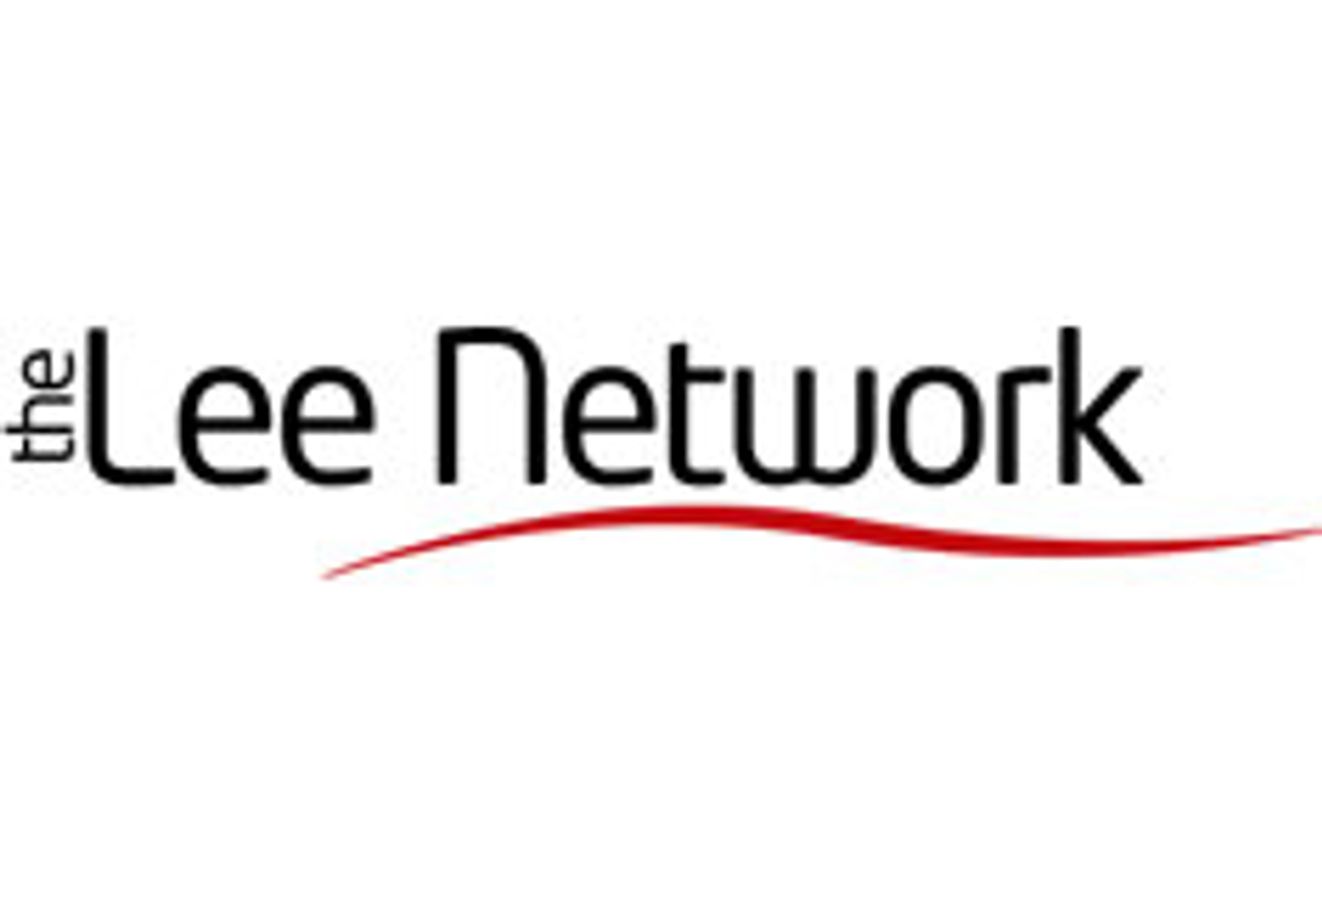 The Lee Network